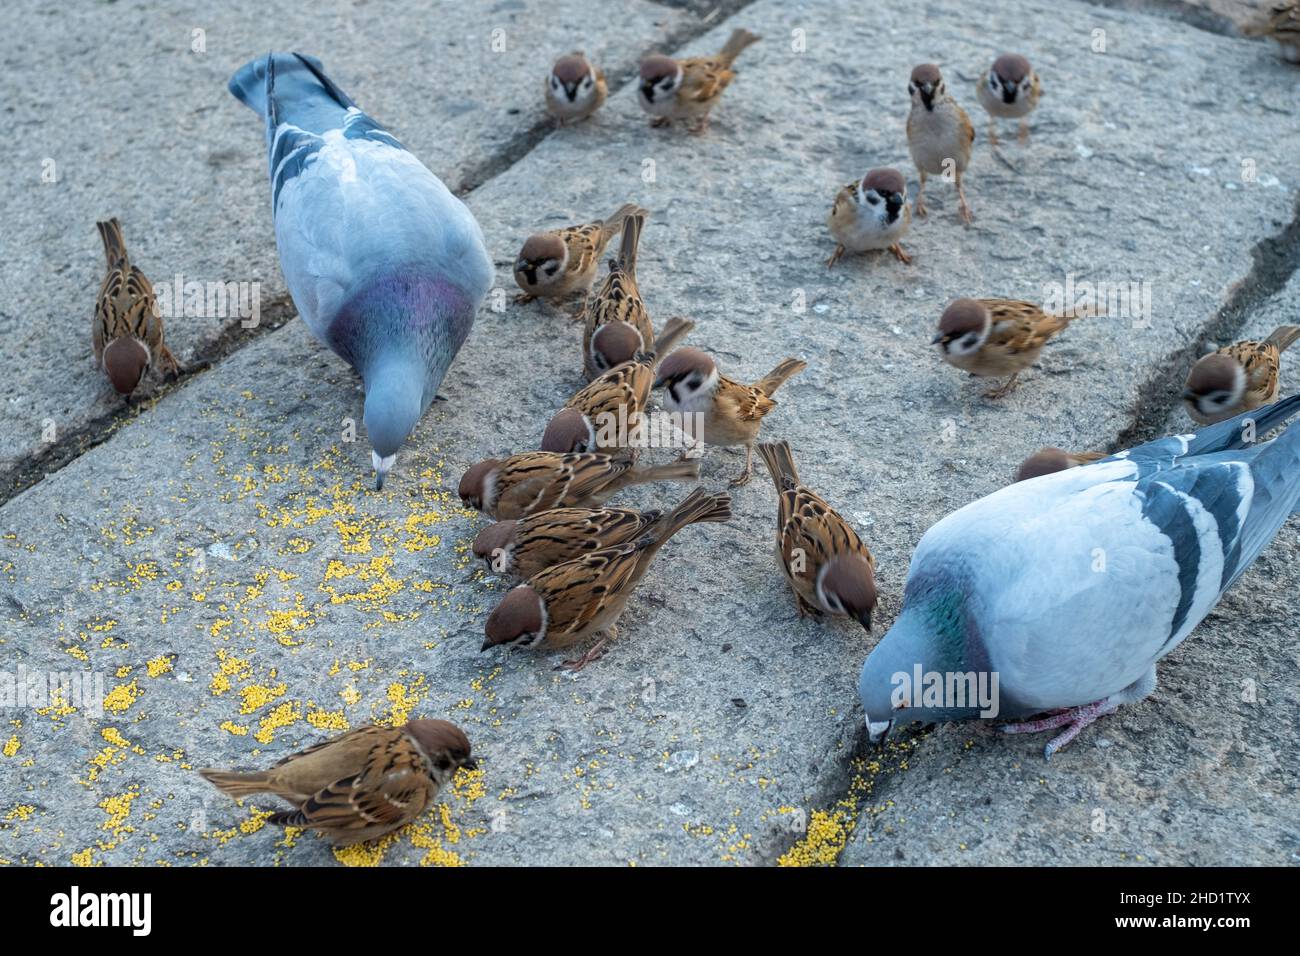 A group of sparrows and pigeons eat together at a tourist spot in Beijing, China. Stock Photo